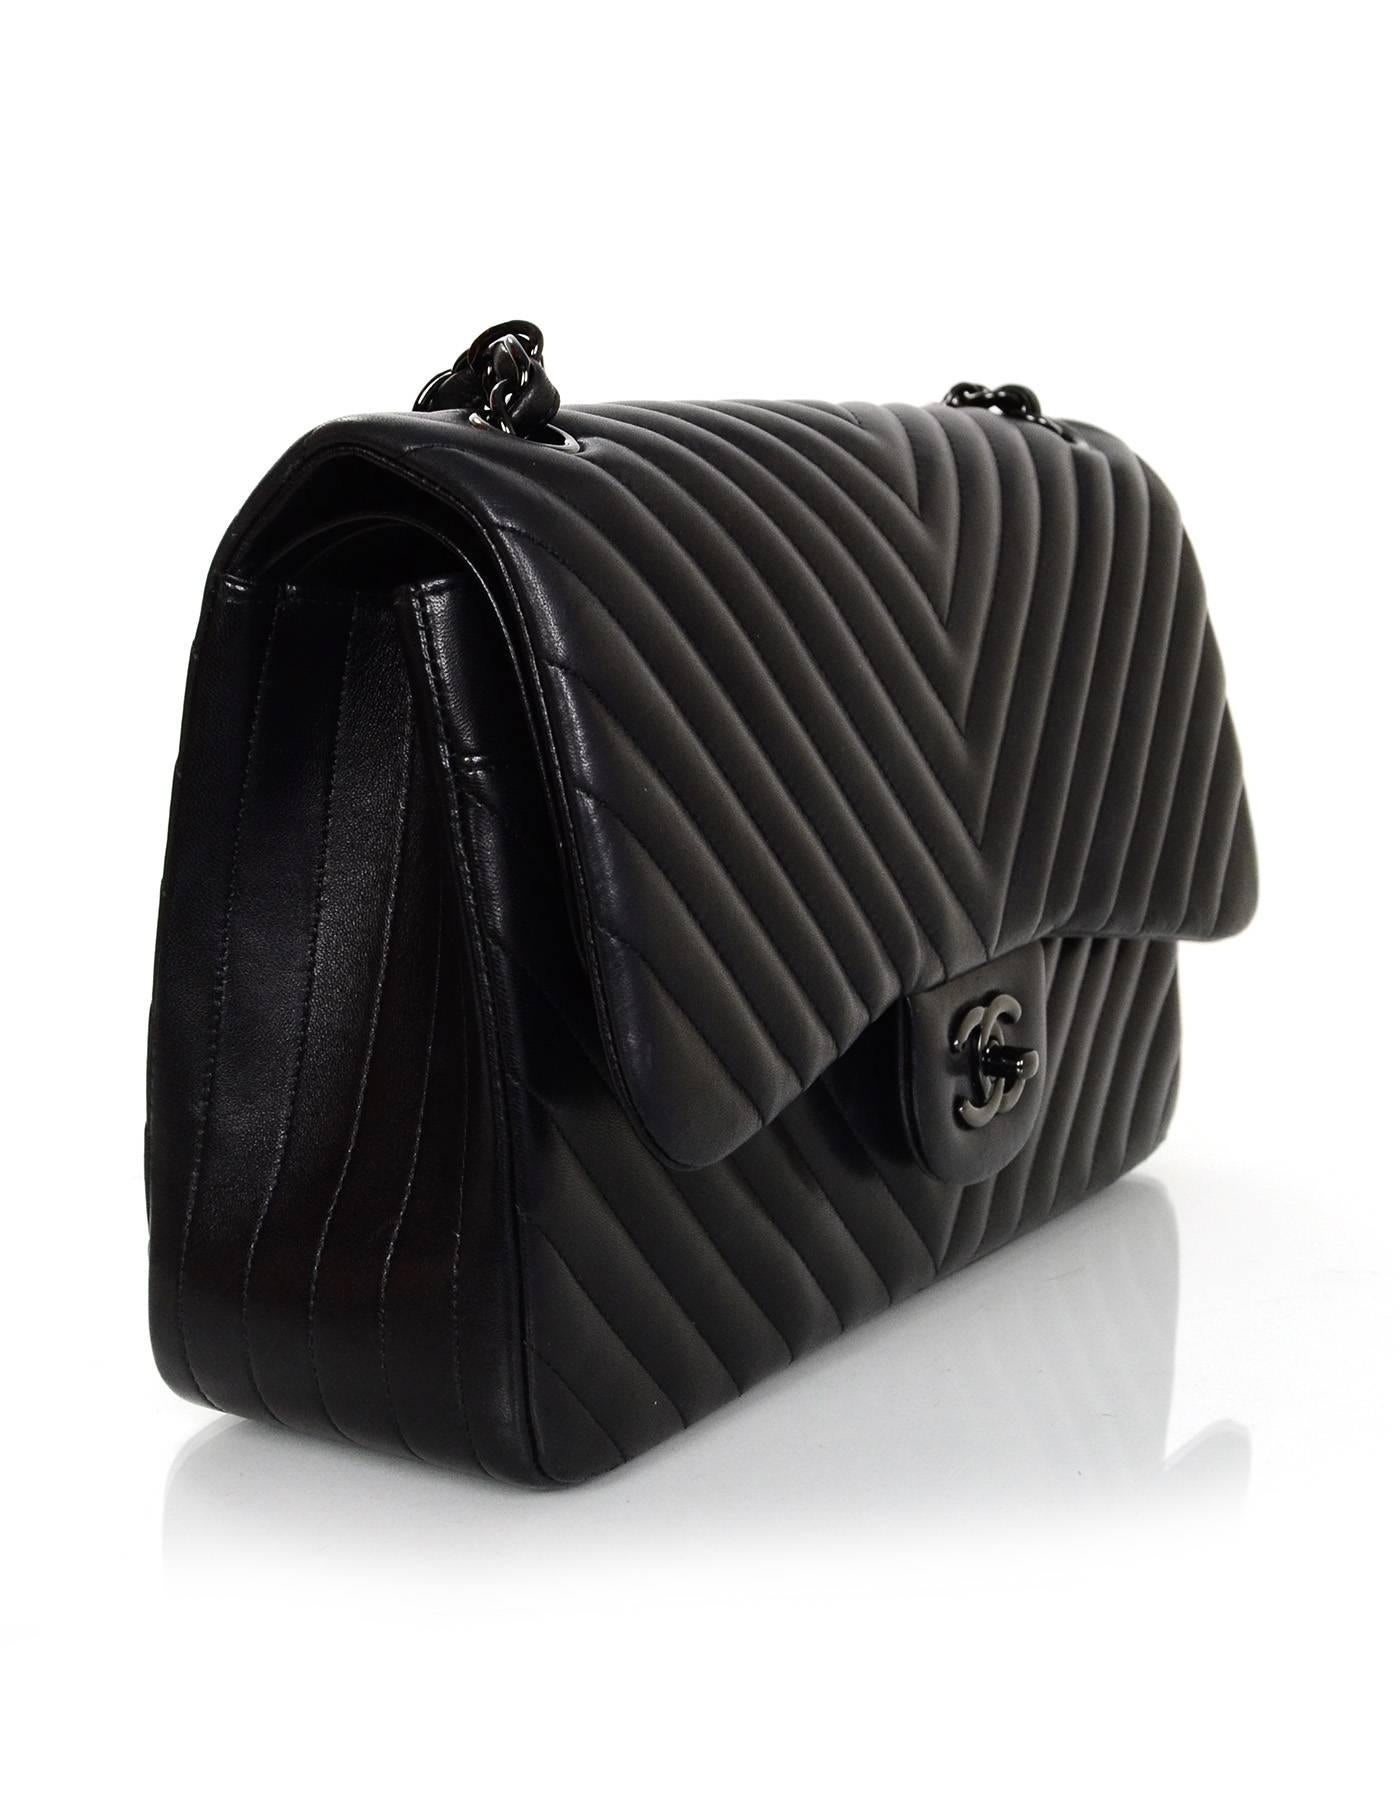 100% Authentic Chanel Chevron SO Black Double Flap Classic Jumbo. This bag is sold out everywhere and is perfect for any Chanel lover or collector. Features chevron quilted lambskin leather with black hardware.

Made In: France
Year of Production: